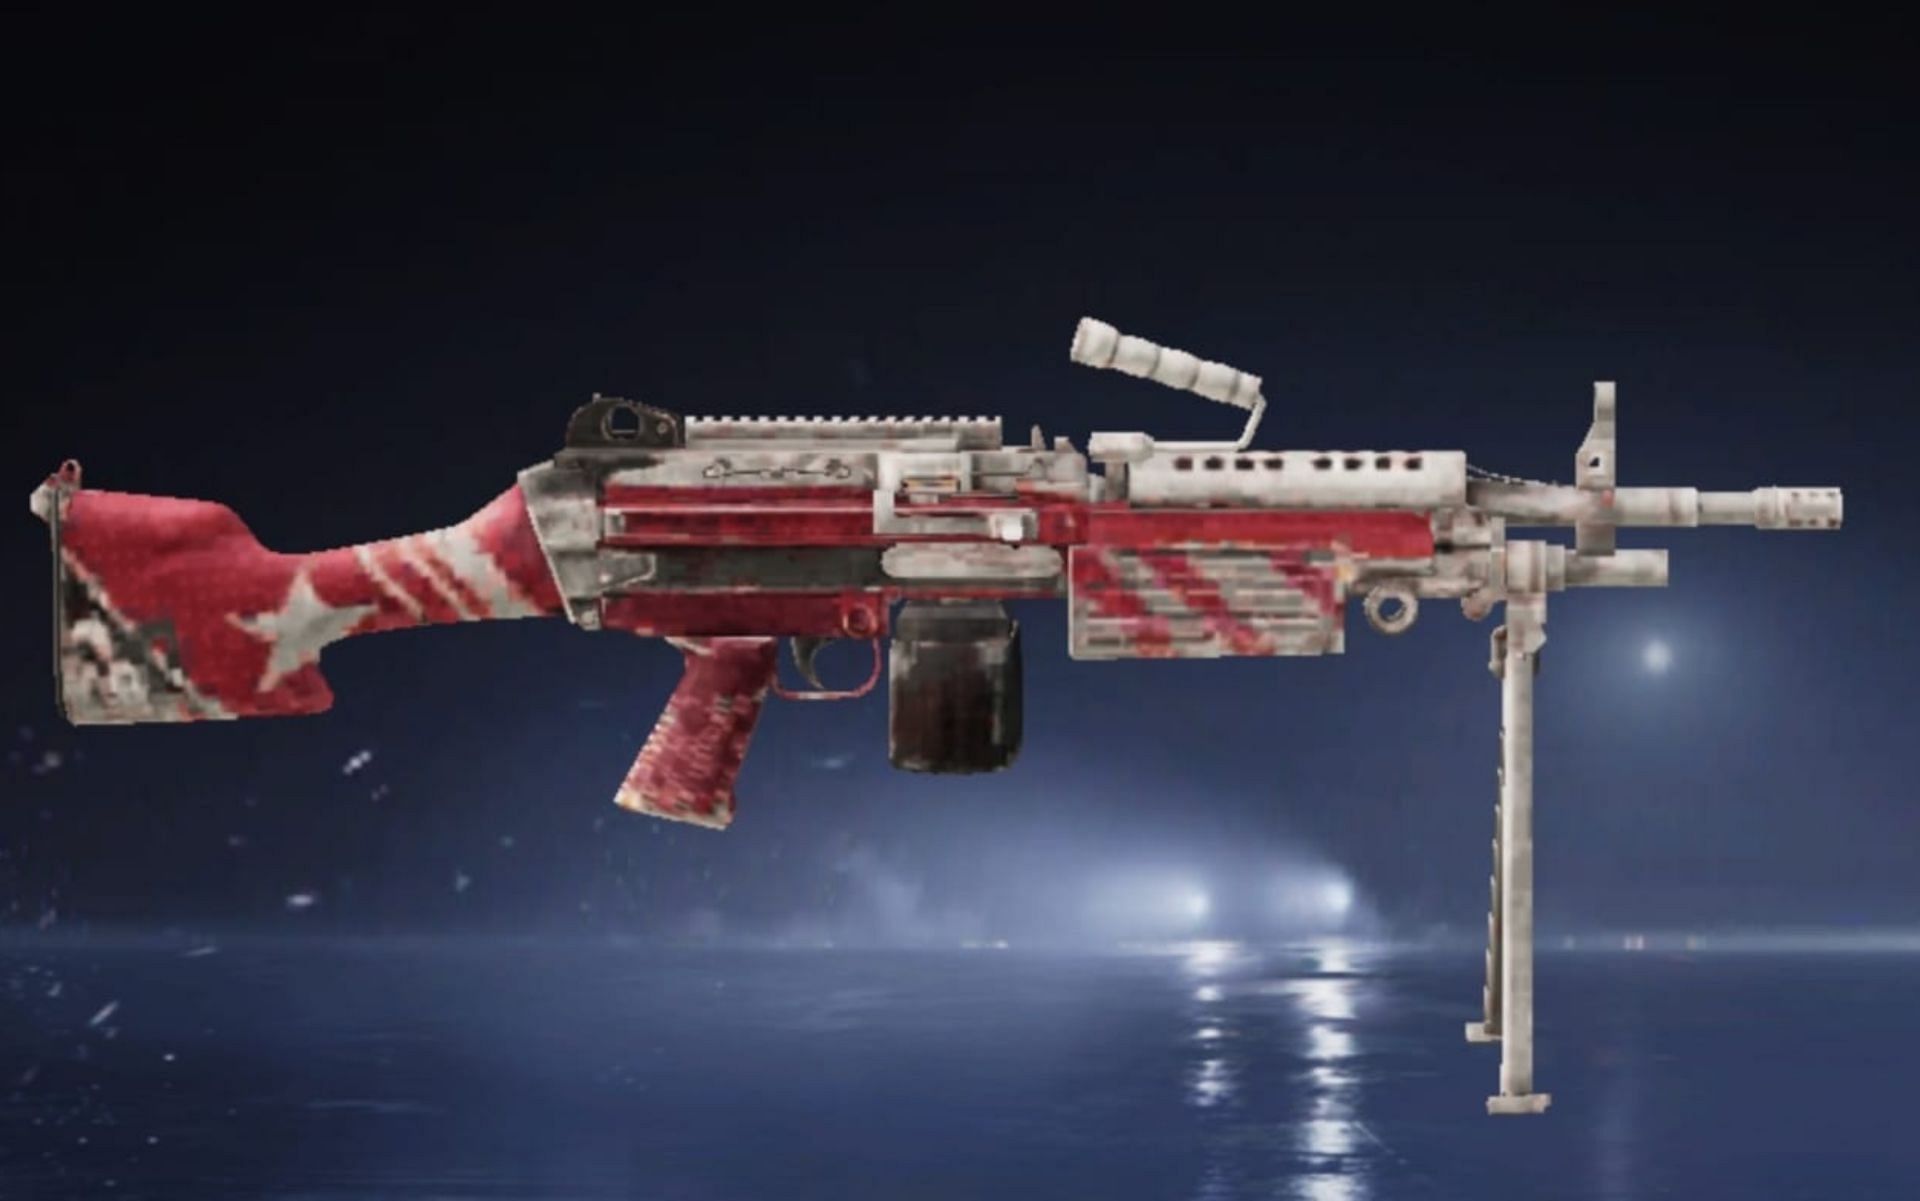 A permanent M249 skin can be obtained for free in the BGMI Anniversary Special Login event (Image via Krafton)